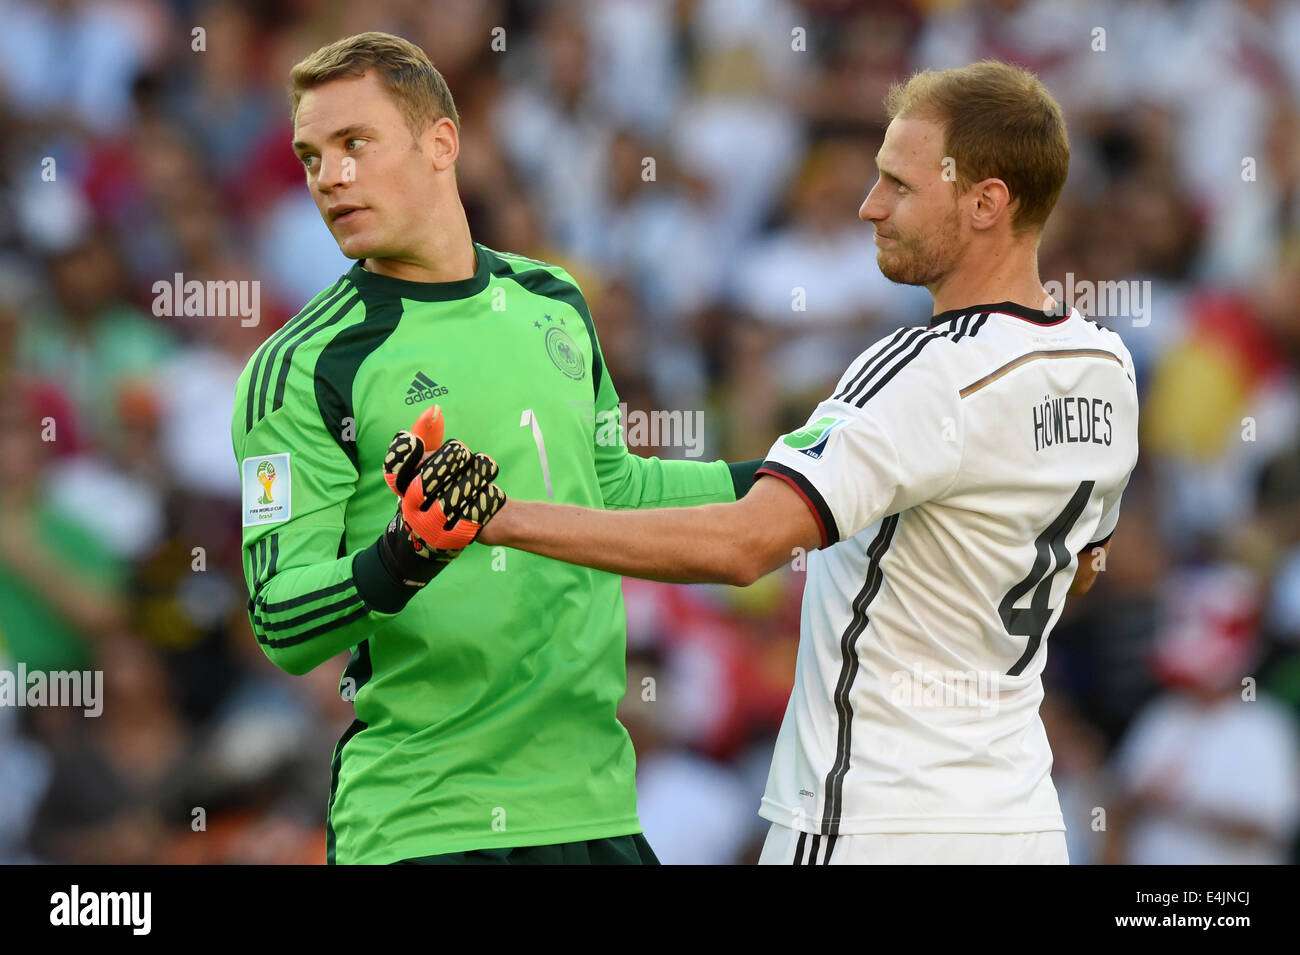 Rio de Janeiro, Brazil. 13th July, 2014. Goalkeeper Manuel Neuer and Benedikt Hoewedes (R) of Germany seen during the FIFA World Cup 2014 final soccer match between Germany and Argentina at the Estadio do Maracana in Rio de Janeiro, Brazil, 13 July 2014. Photo: Marcus Brandt/dpa/Alamy Live News Stock Photo